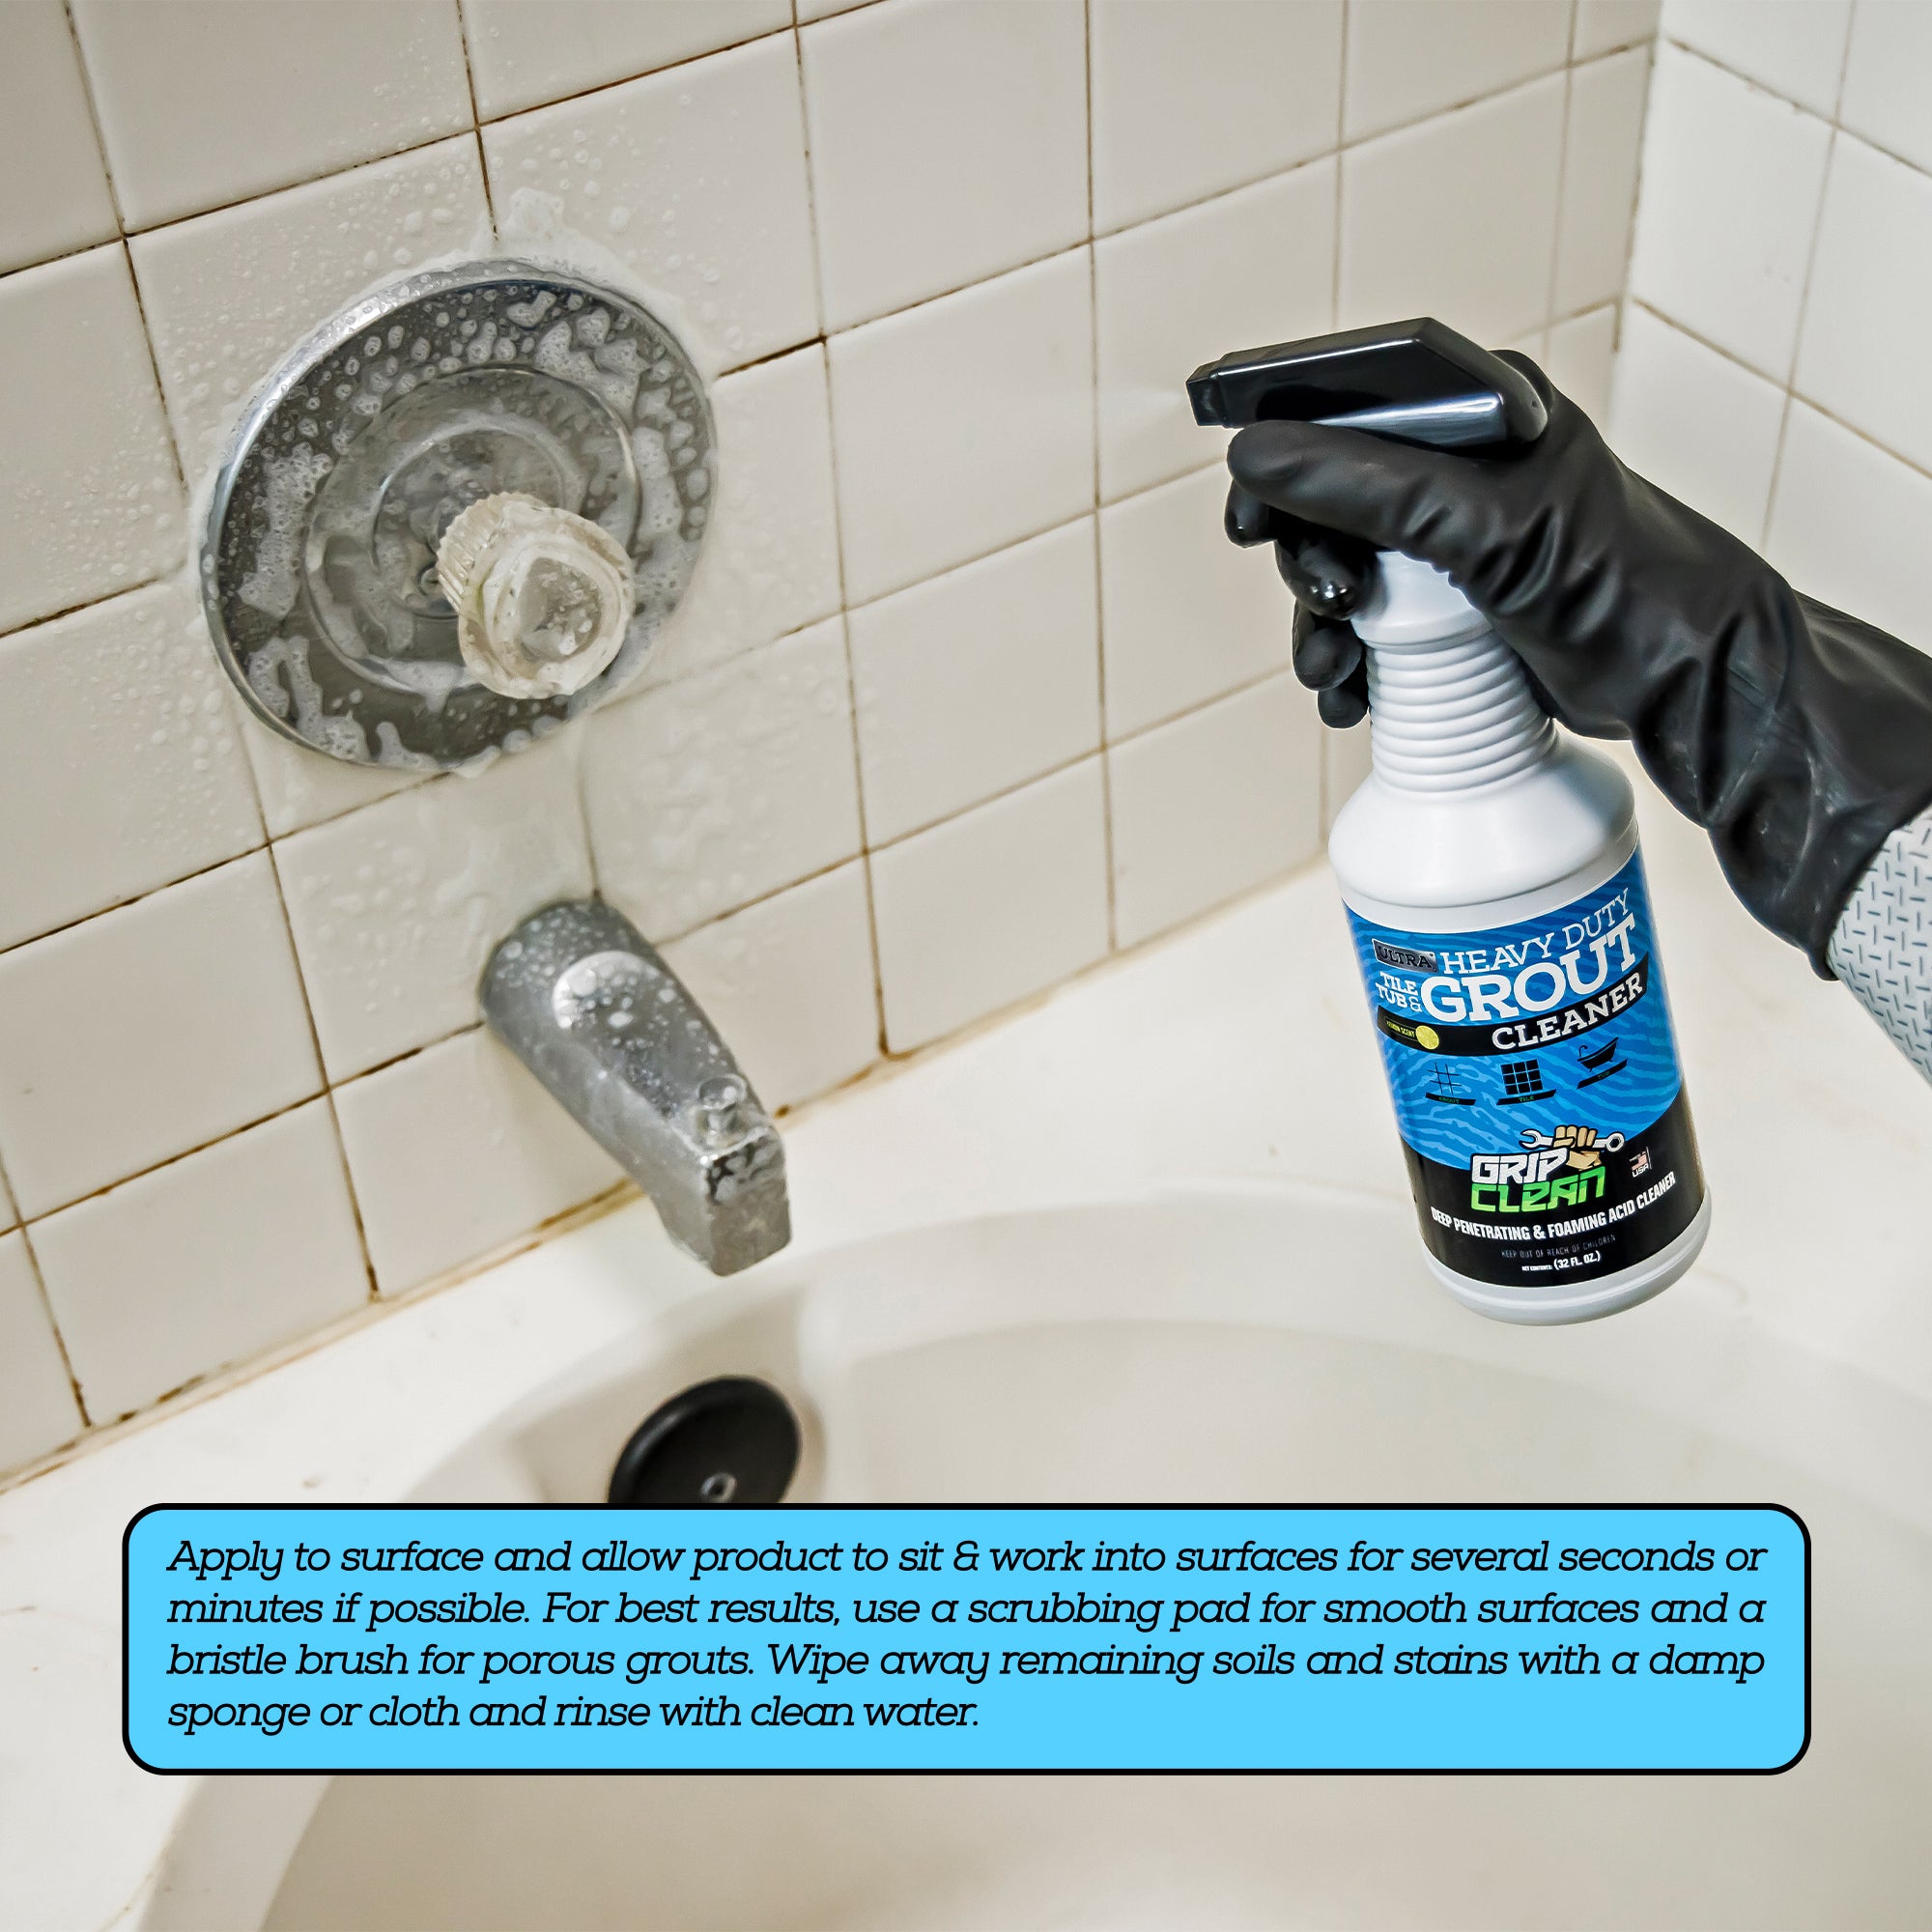 GROUT GURU Grout Cleaner for Tile Floors Works In Minutes - Powerful Tile  Cleaner for Bathroom, Shower, Kitchen, Porcelain, Ceramic and Stone Tiles 